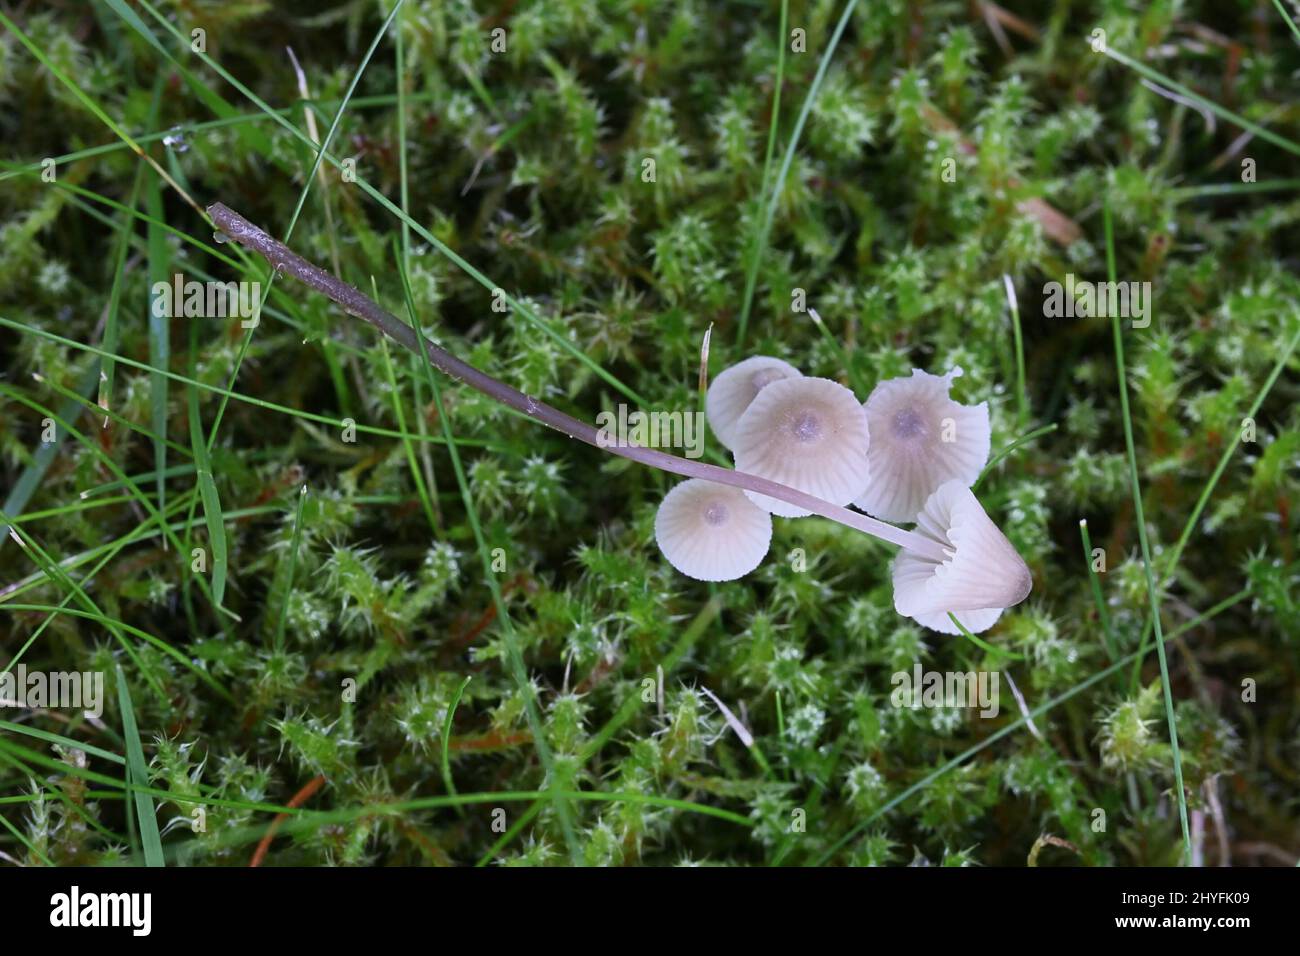 Mycena aetites, commonly known as the drab bonnet, wild mushroom from Finland Stock Photo